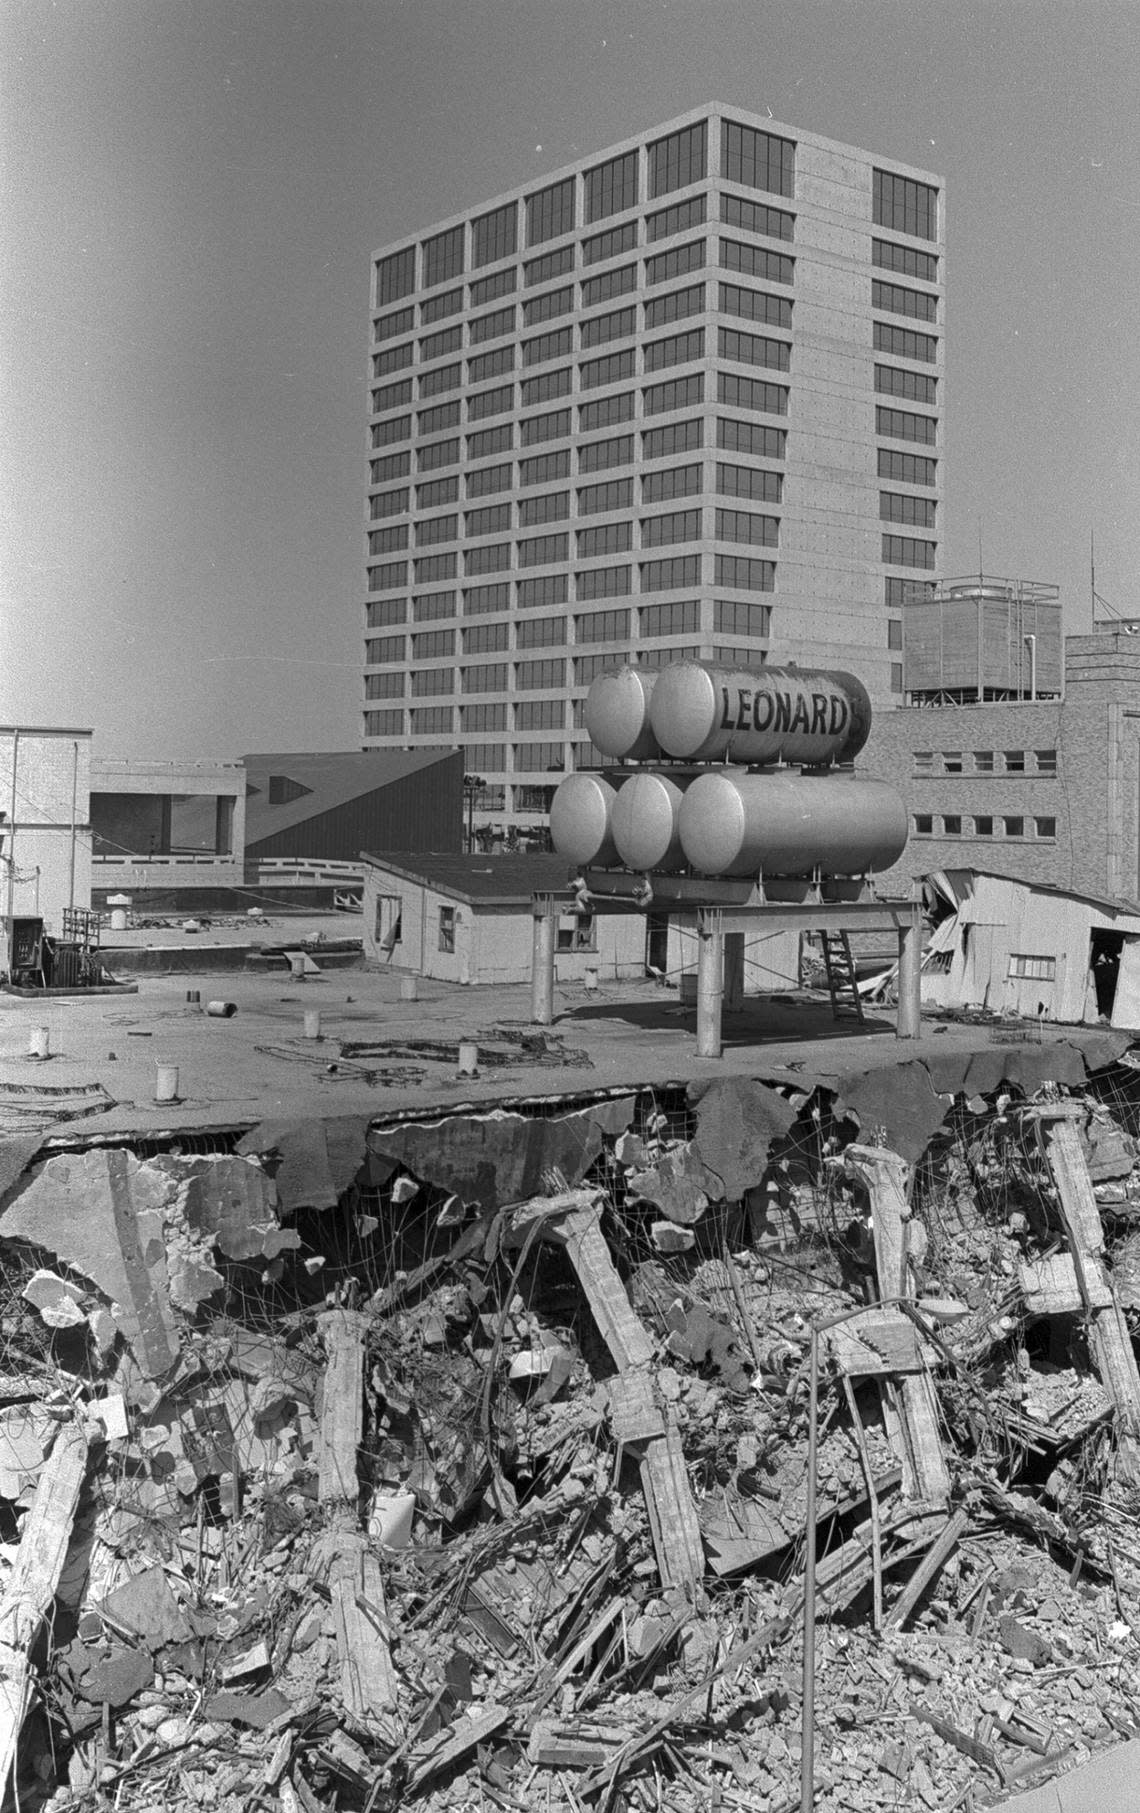 May 16, 1979: The demolition of Leonard’s Department Store.